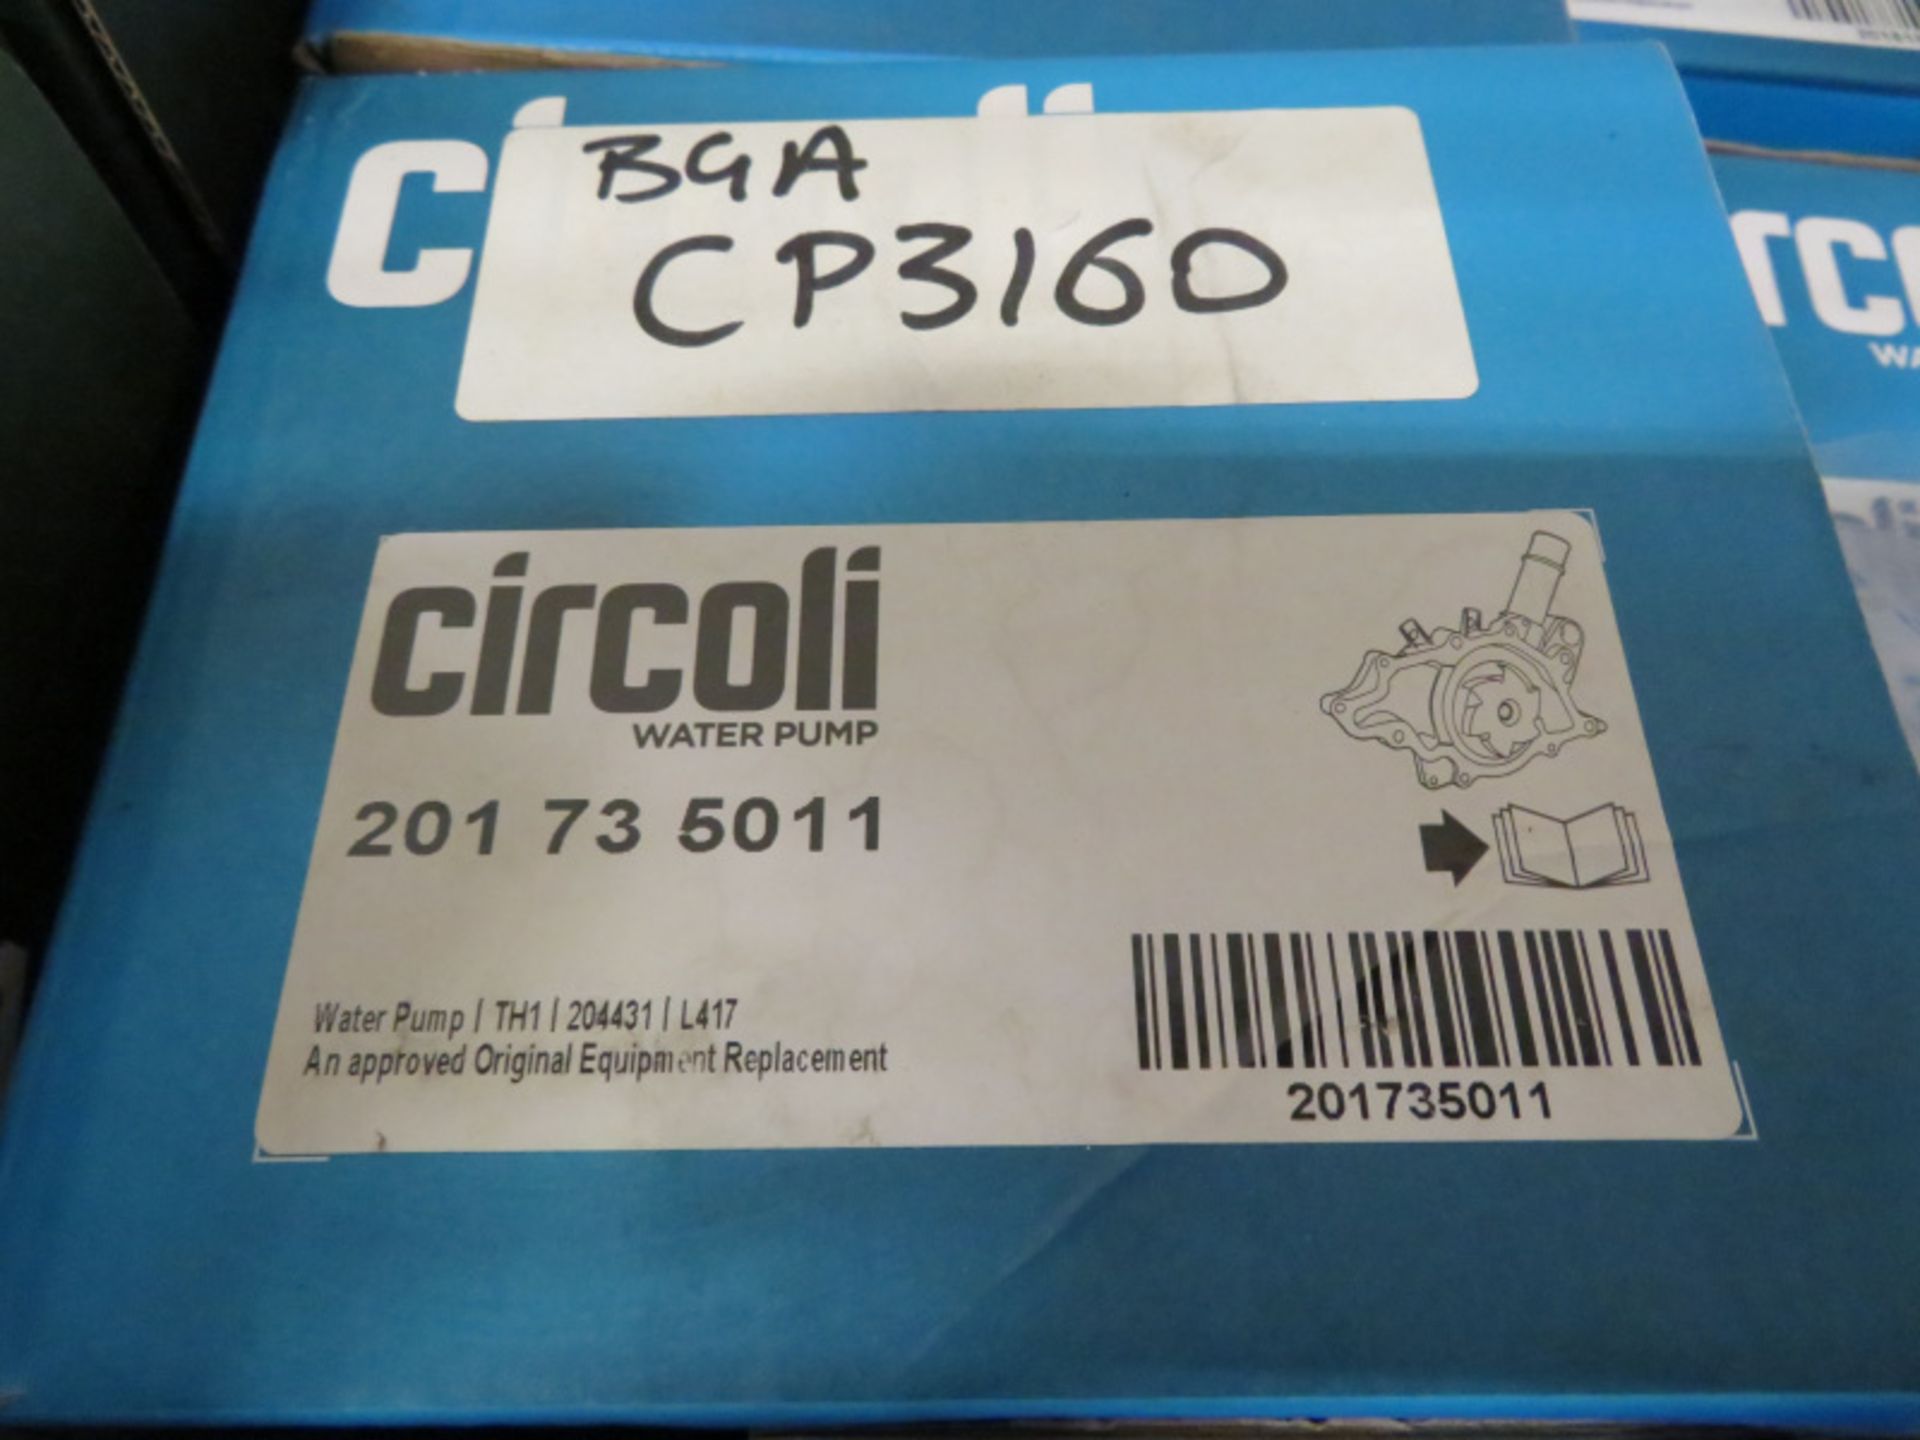 Vehicle parts - BGA, Circoli - see pictures for models and types - Image 4 of 7